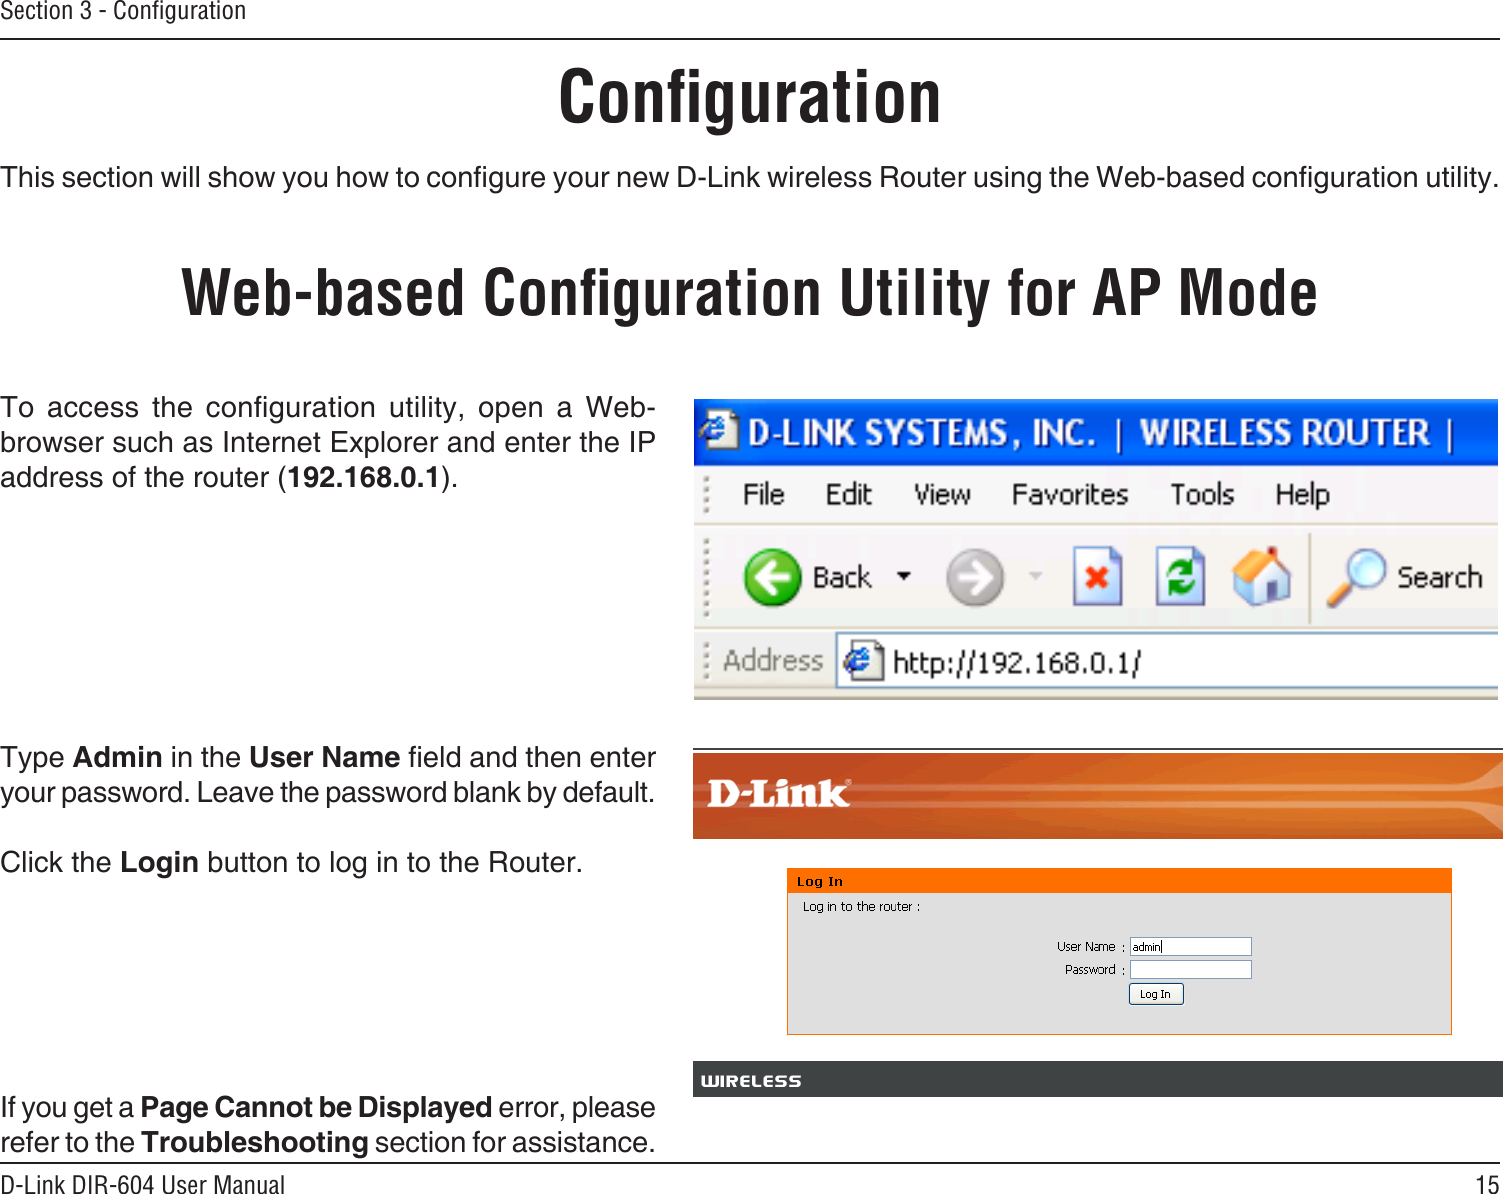 15D-Link DIR-604 User ManualSection 3 - ConﬁgurationConﬁgurationThis section will show you how to congure your new D-Link wireless Router using the Web-based conguration utility.Web-based Conﬁguration Utility for AP ModeTo  access  the  conguration  utility,  open  a  Web-browser such as Internet Explorer and enter the IP address of the router (192.168.0.1).Type Admin in the User Name eld and then enter your password. Leave the password blank by default. Click the Login button to log in to the Router.If you get a Page Cannot be Displayed error, please refer to the Troubleshooting section for assistance.